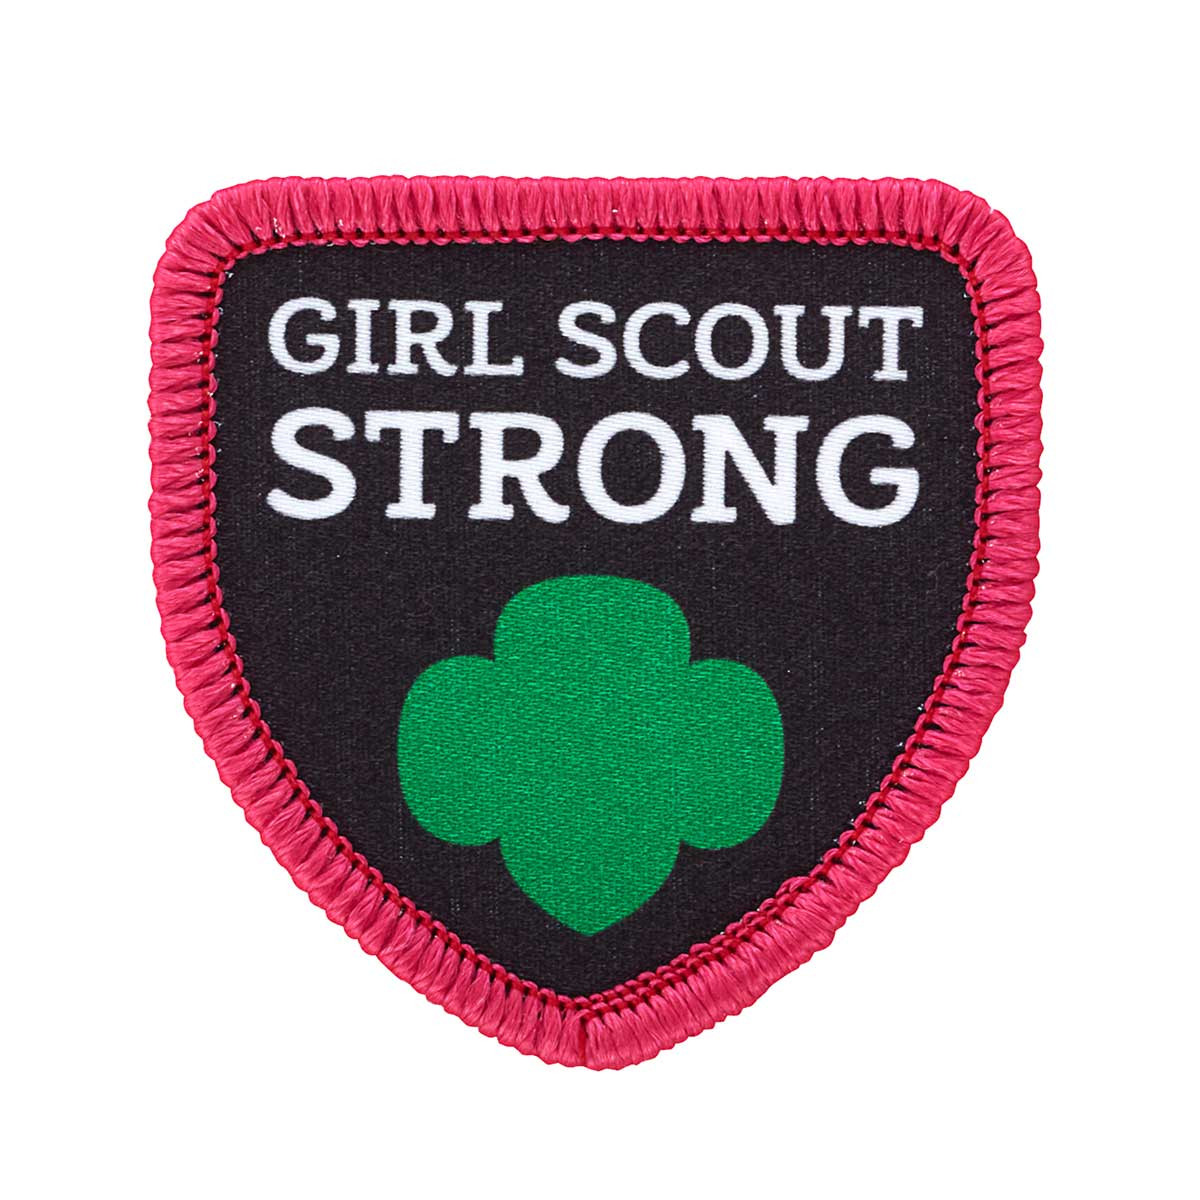 Girl Scout Strong Patch